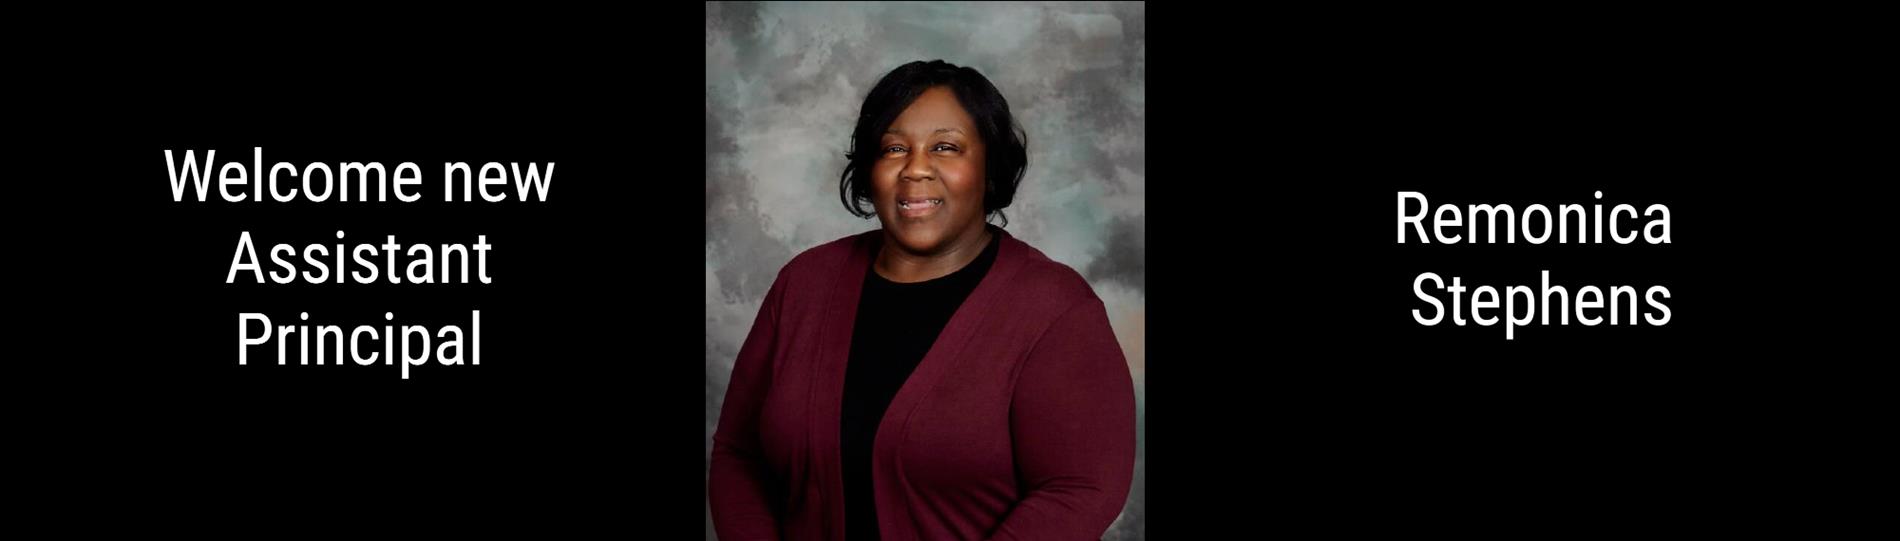 our new assistant principal remonica stephens